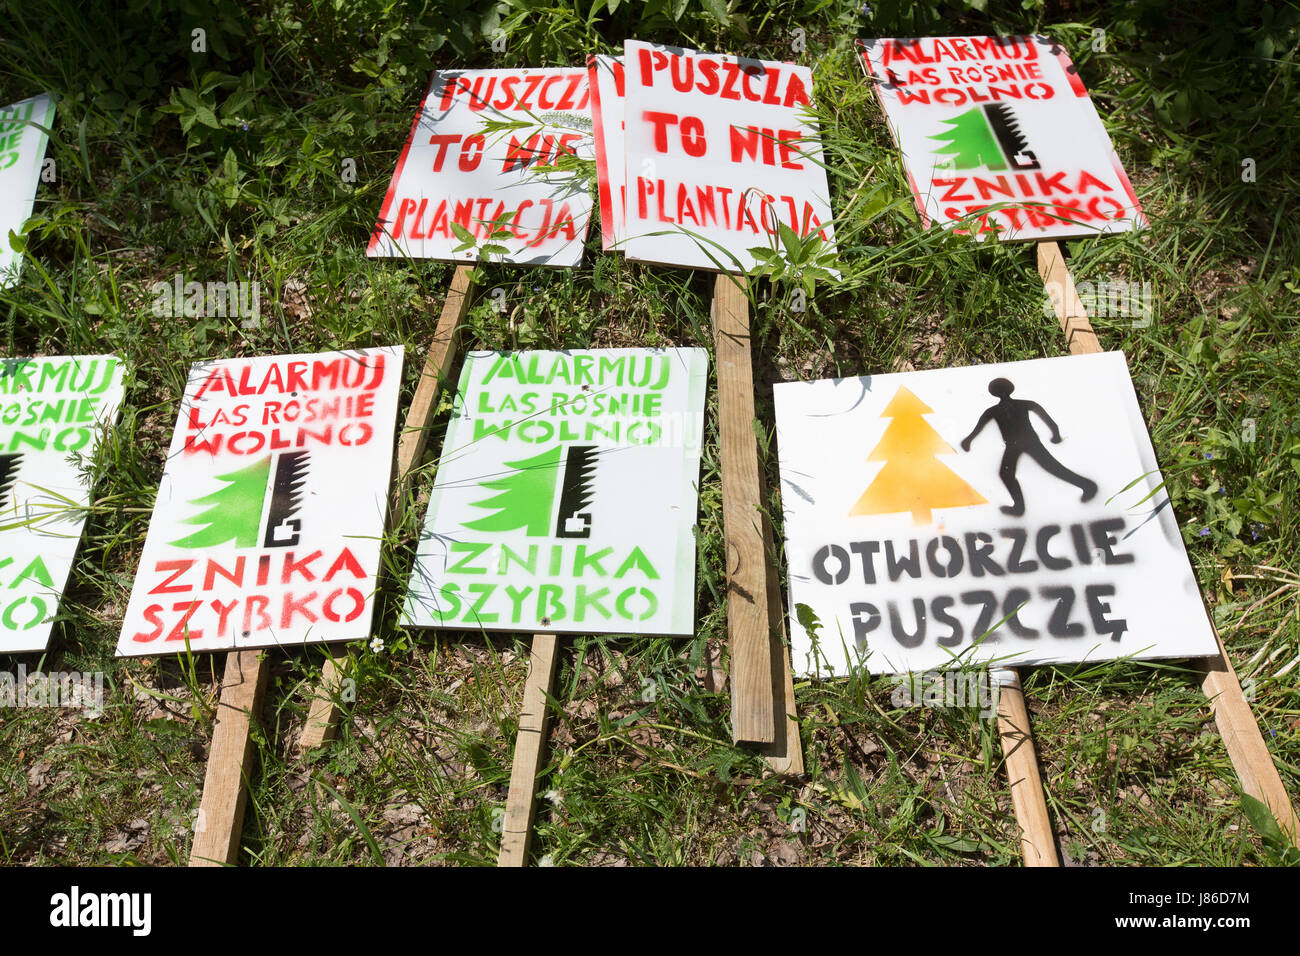 Bialowieza National Park, Poland. 27th May, 2017. Signs with protest slogans wait in the grass at the gathering area for a protest march of eco activists to be picked up by demonstrators, at Bialowieza National Park, Poland, 27 May 2017. With a march supported by Greenpeace activists wanted to protest against recent changes in the management plan for the Bialowieza National Park, that would allow for logging of 188 cubic meters of wood in the highly protected primevel forest. Photo: Jan A. Nicolas/dpa/Alamy Live News Stock Photo